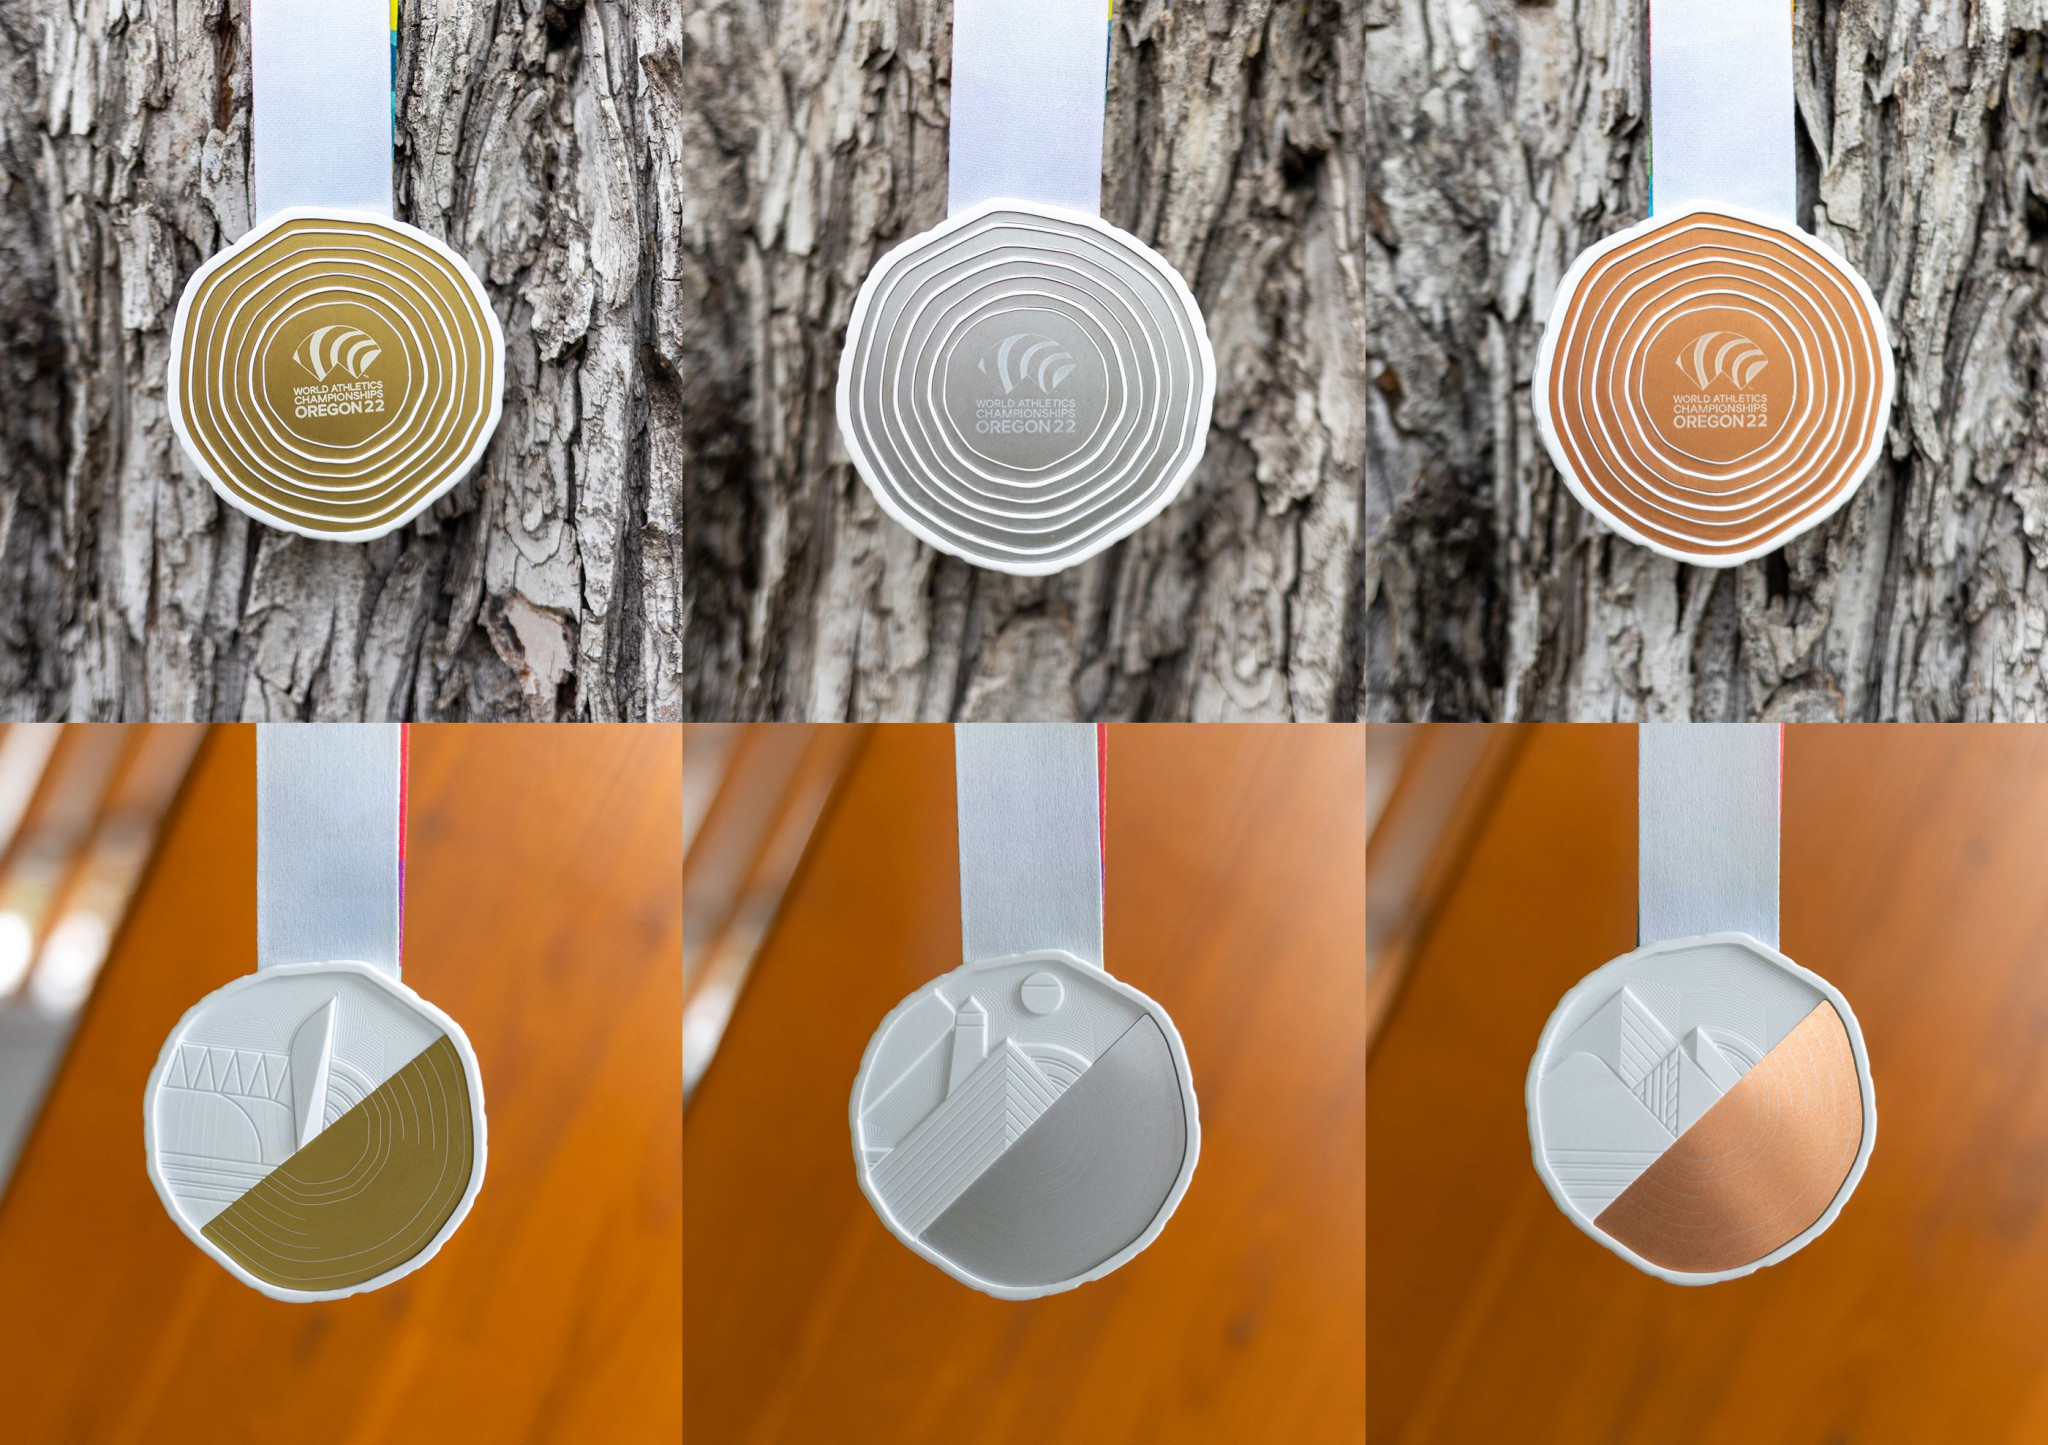 The medals for the Oregon22 World Athletics Championships have been revealed with only days left until the competition starts ©World Athletics/WCH Oregon22